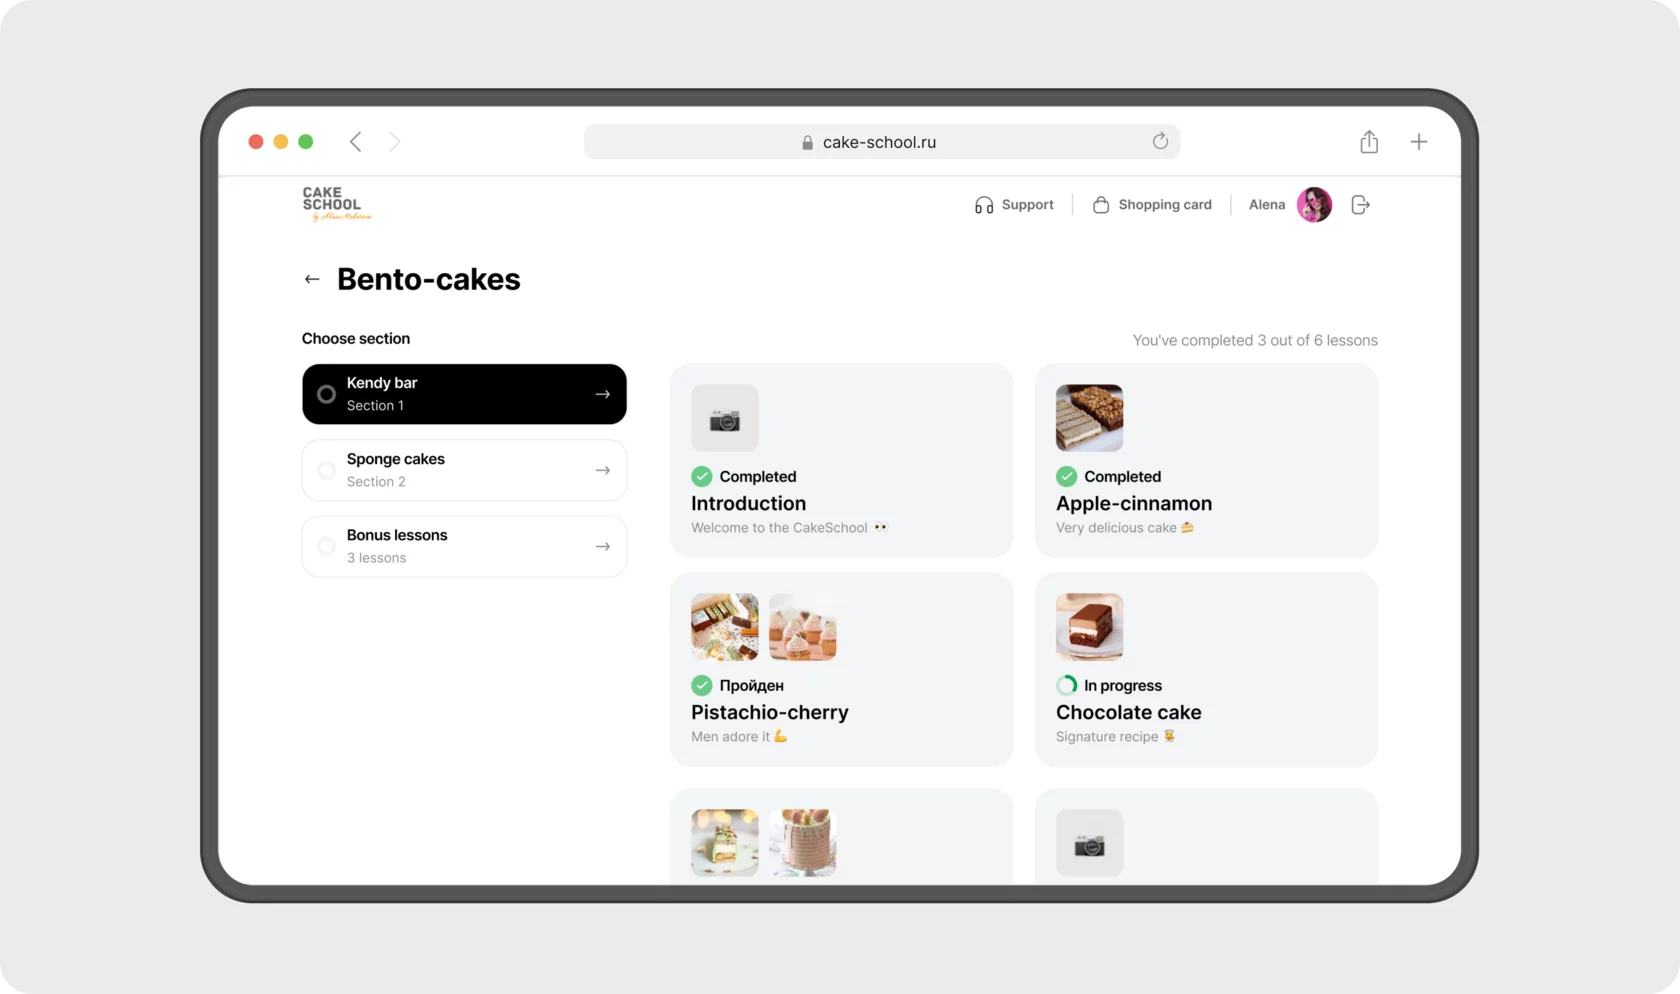 CakeSchool: Revolutionizing Pastry Education with FlutterFlow